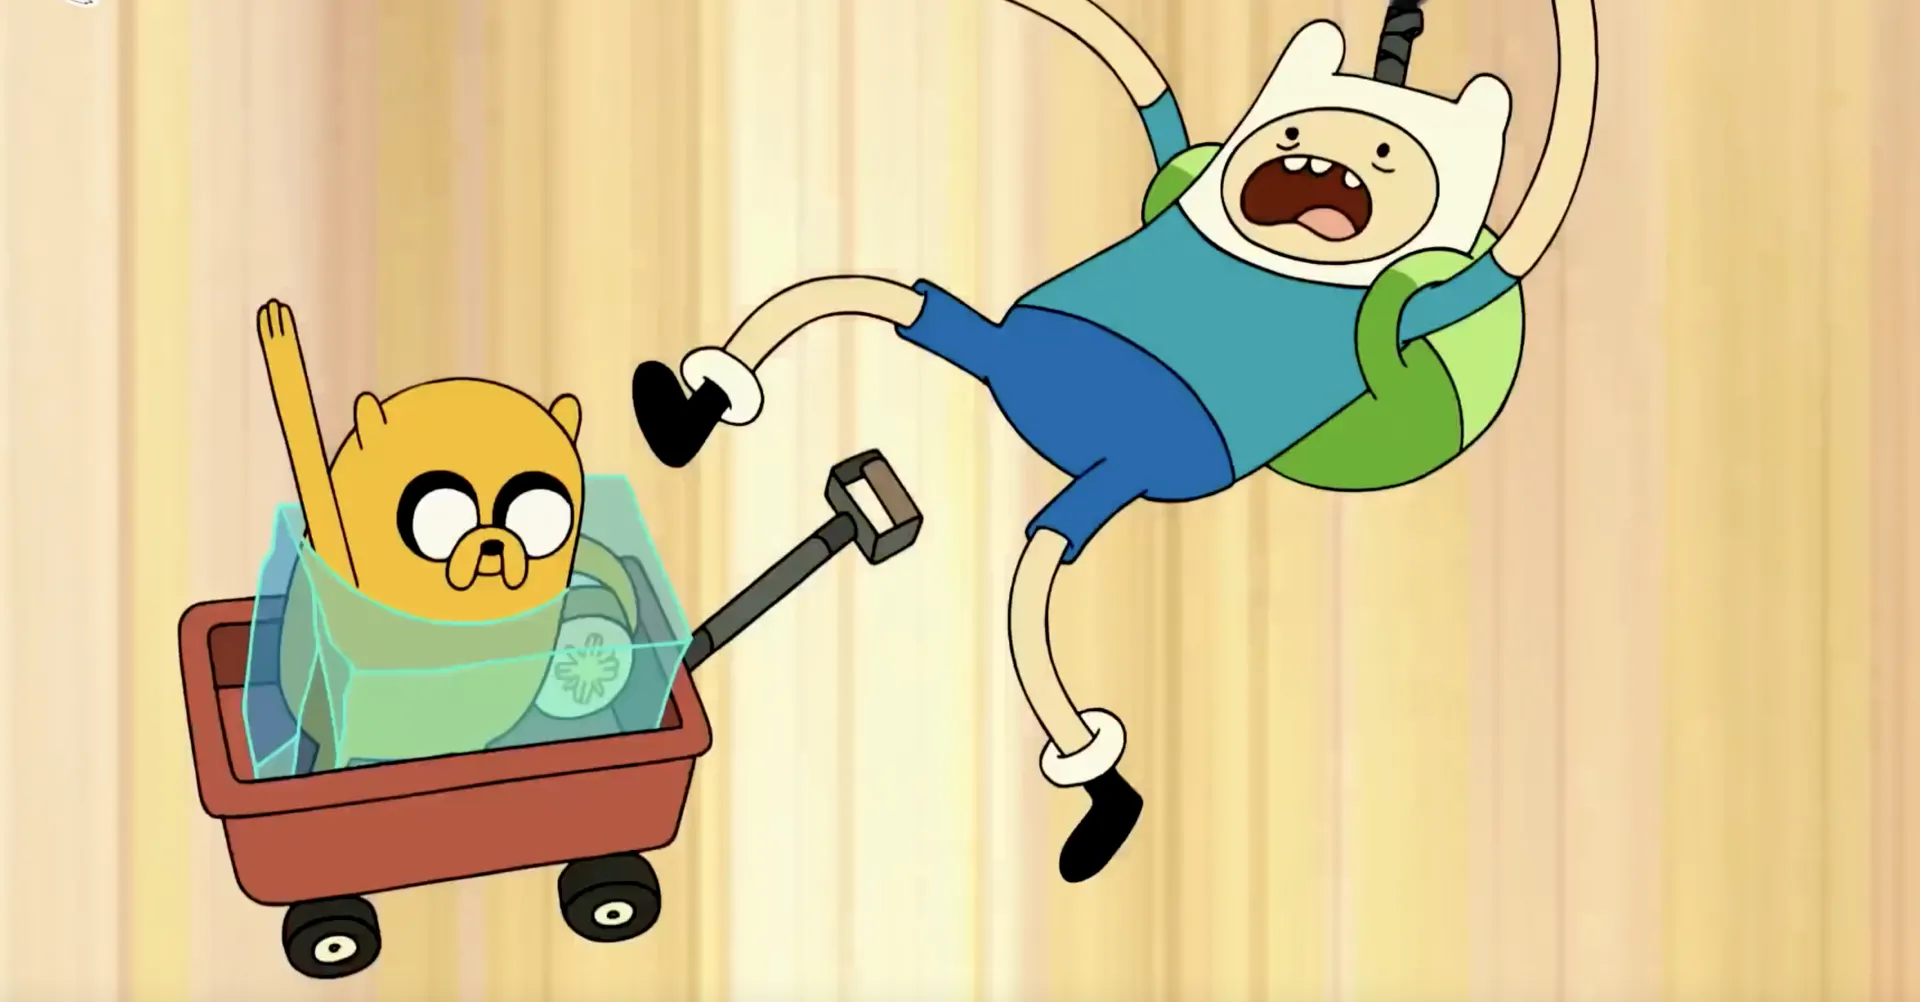 The new Adventure Time special messed me up, bro